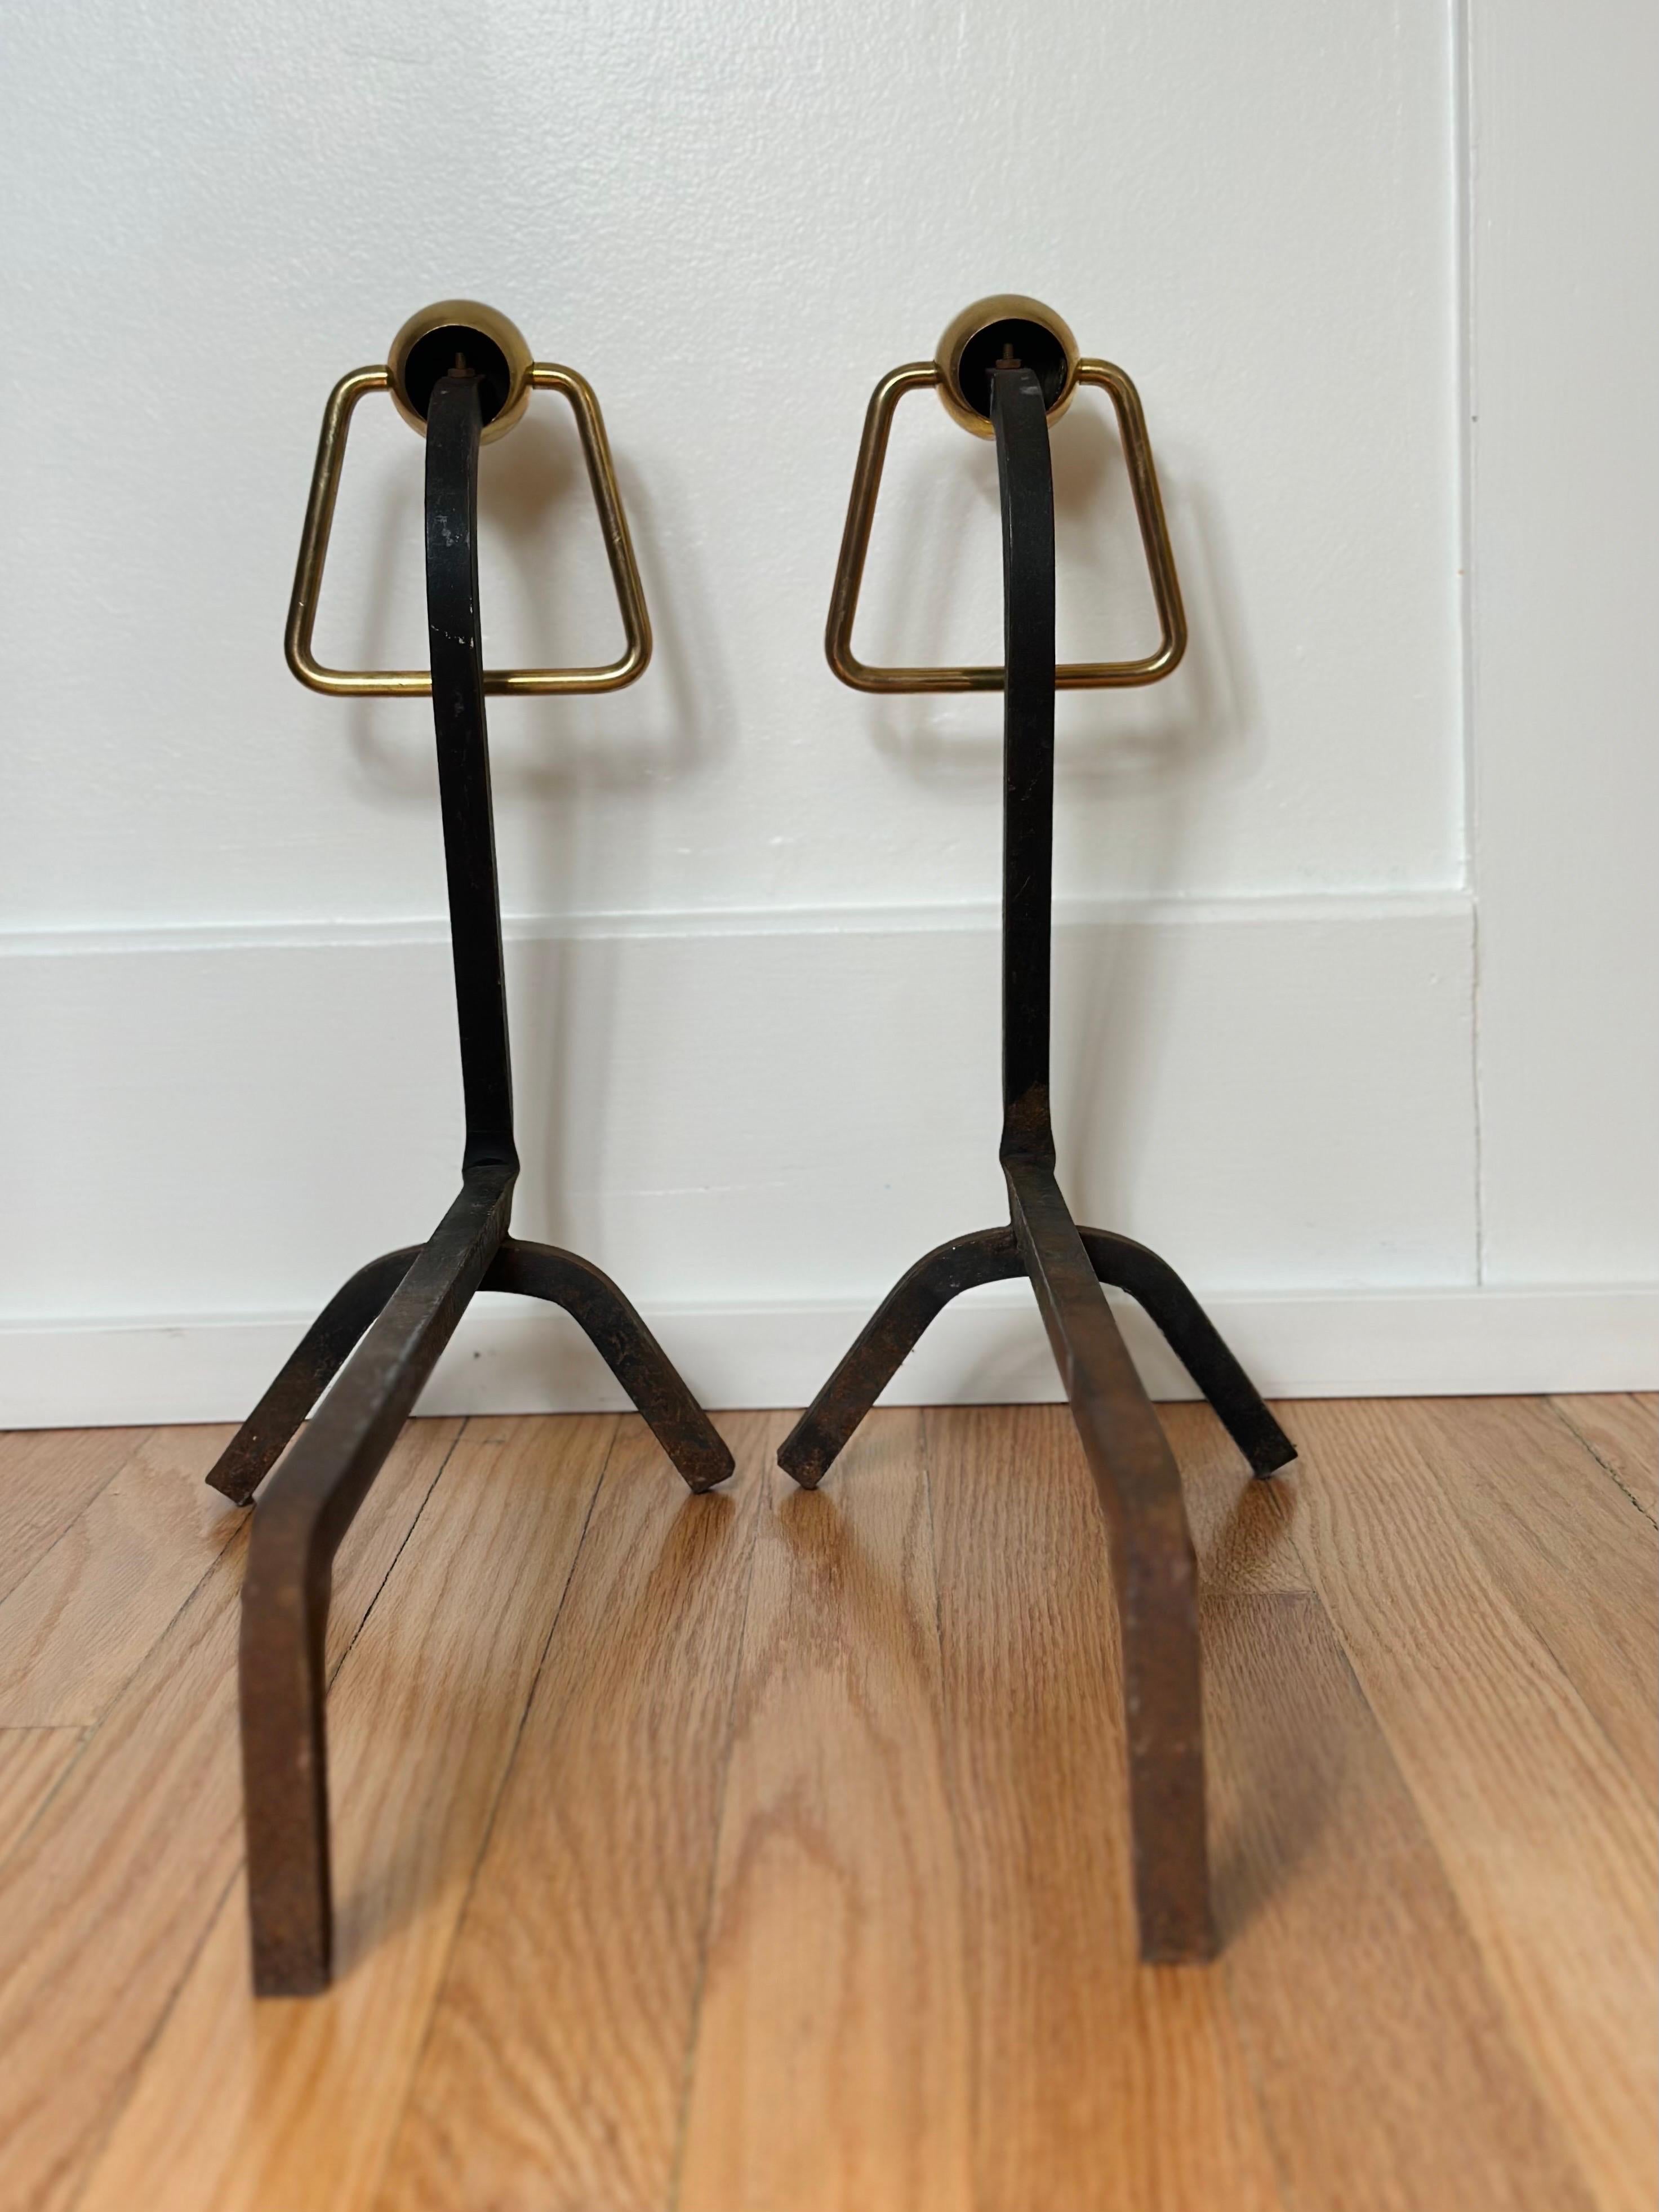 Mid-20th Century 1940s Modernist Jacques Adnet Style Wrought Iron and Brass Andirons - a Pair For Sale